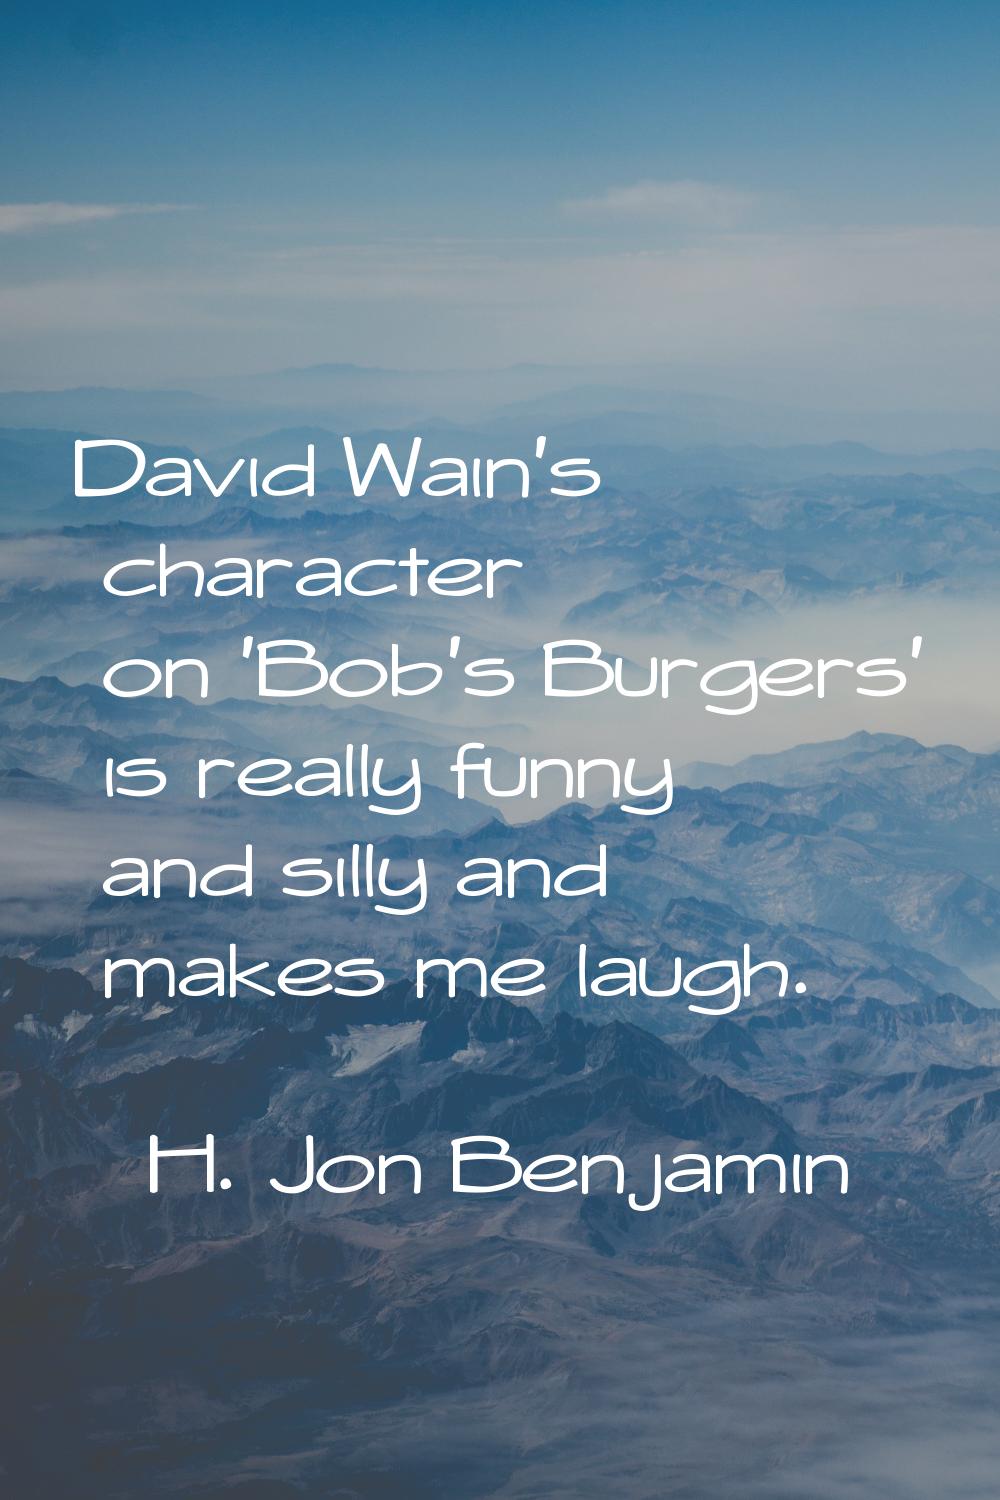 David Wain's character on 'Bob's Burgers' is really funny and silly and makes me laugh.